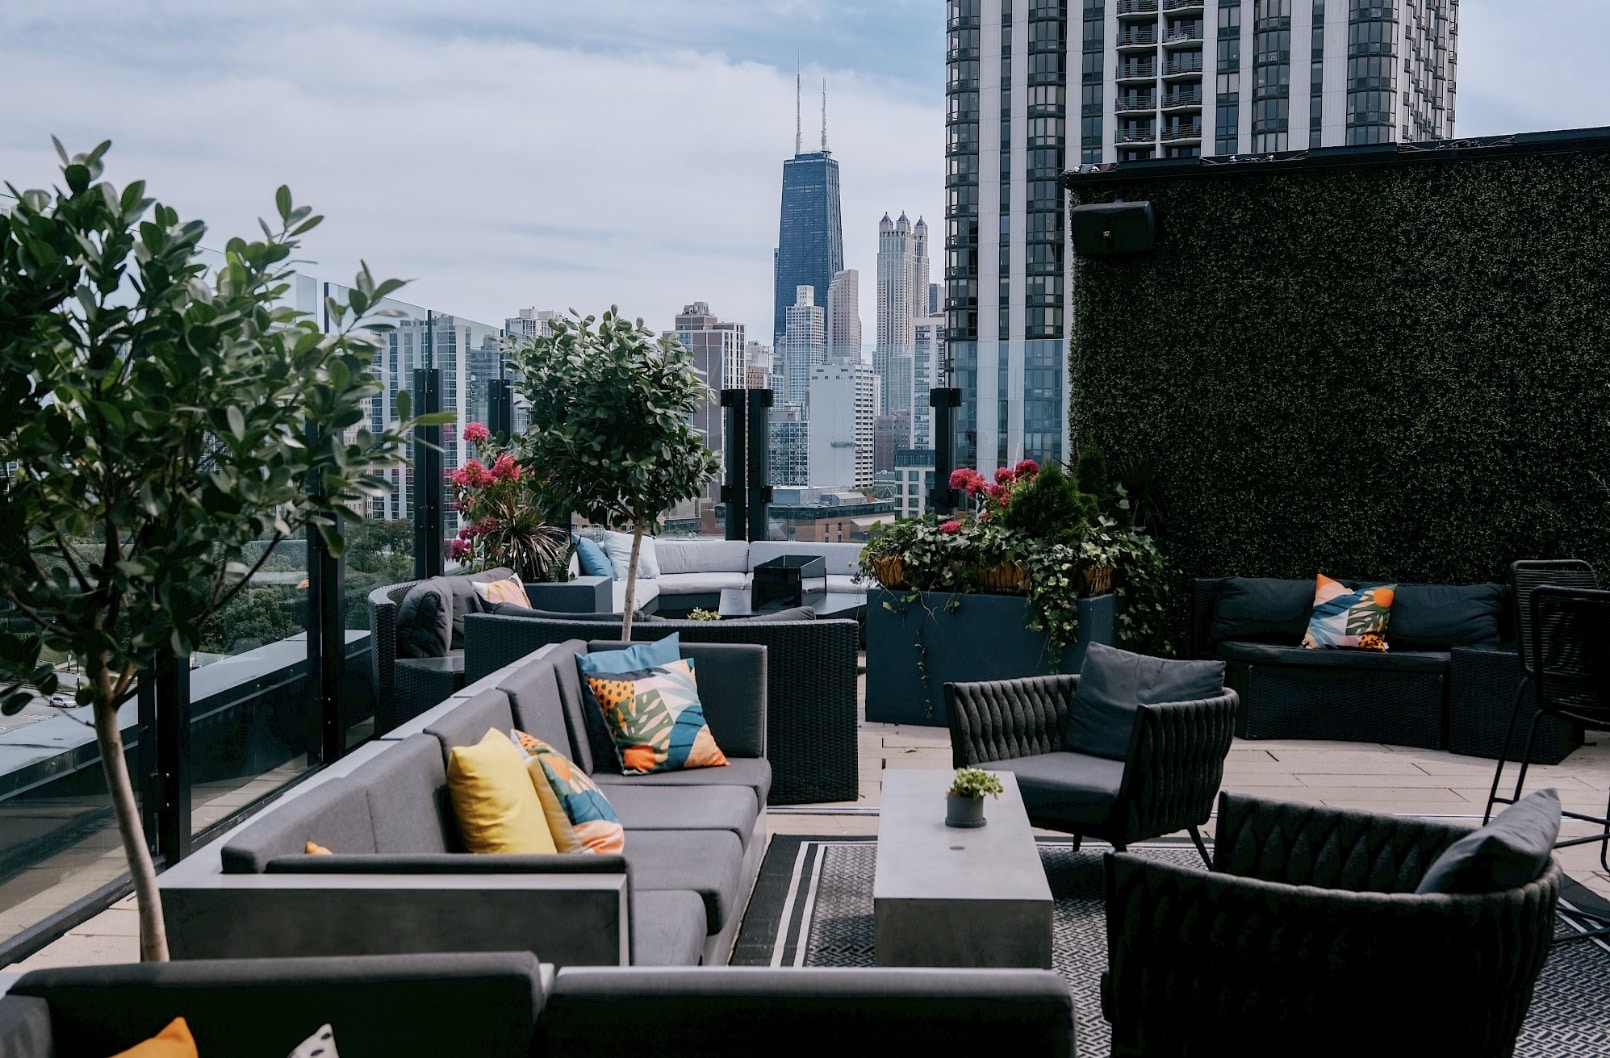 J parker rooftop with tree , flowers, couches with blue, orange, yellow pillows views of the john hancock and the four seasons